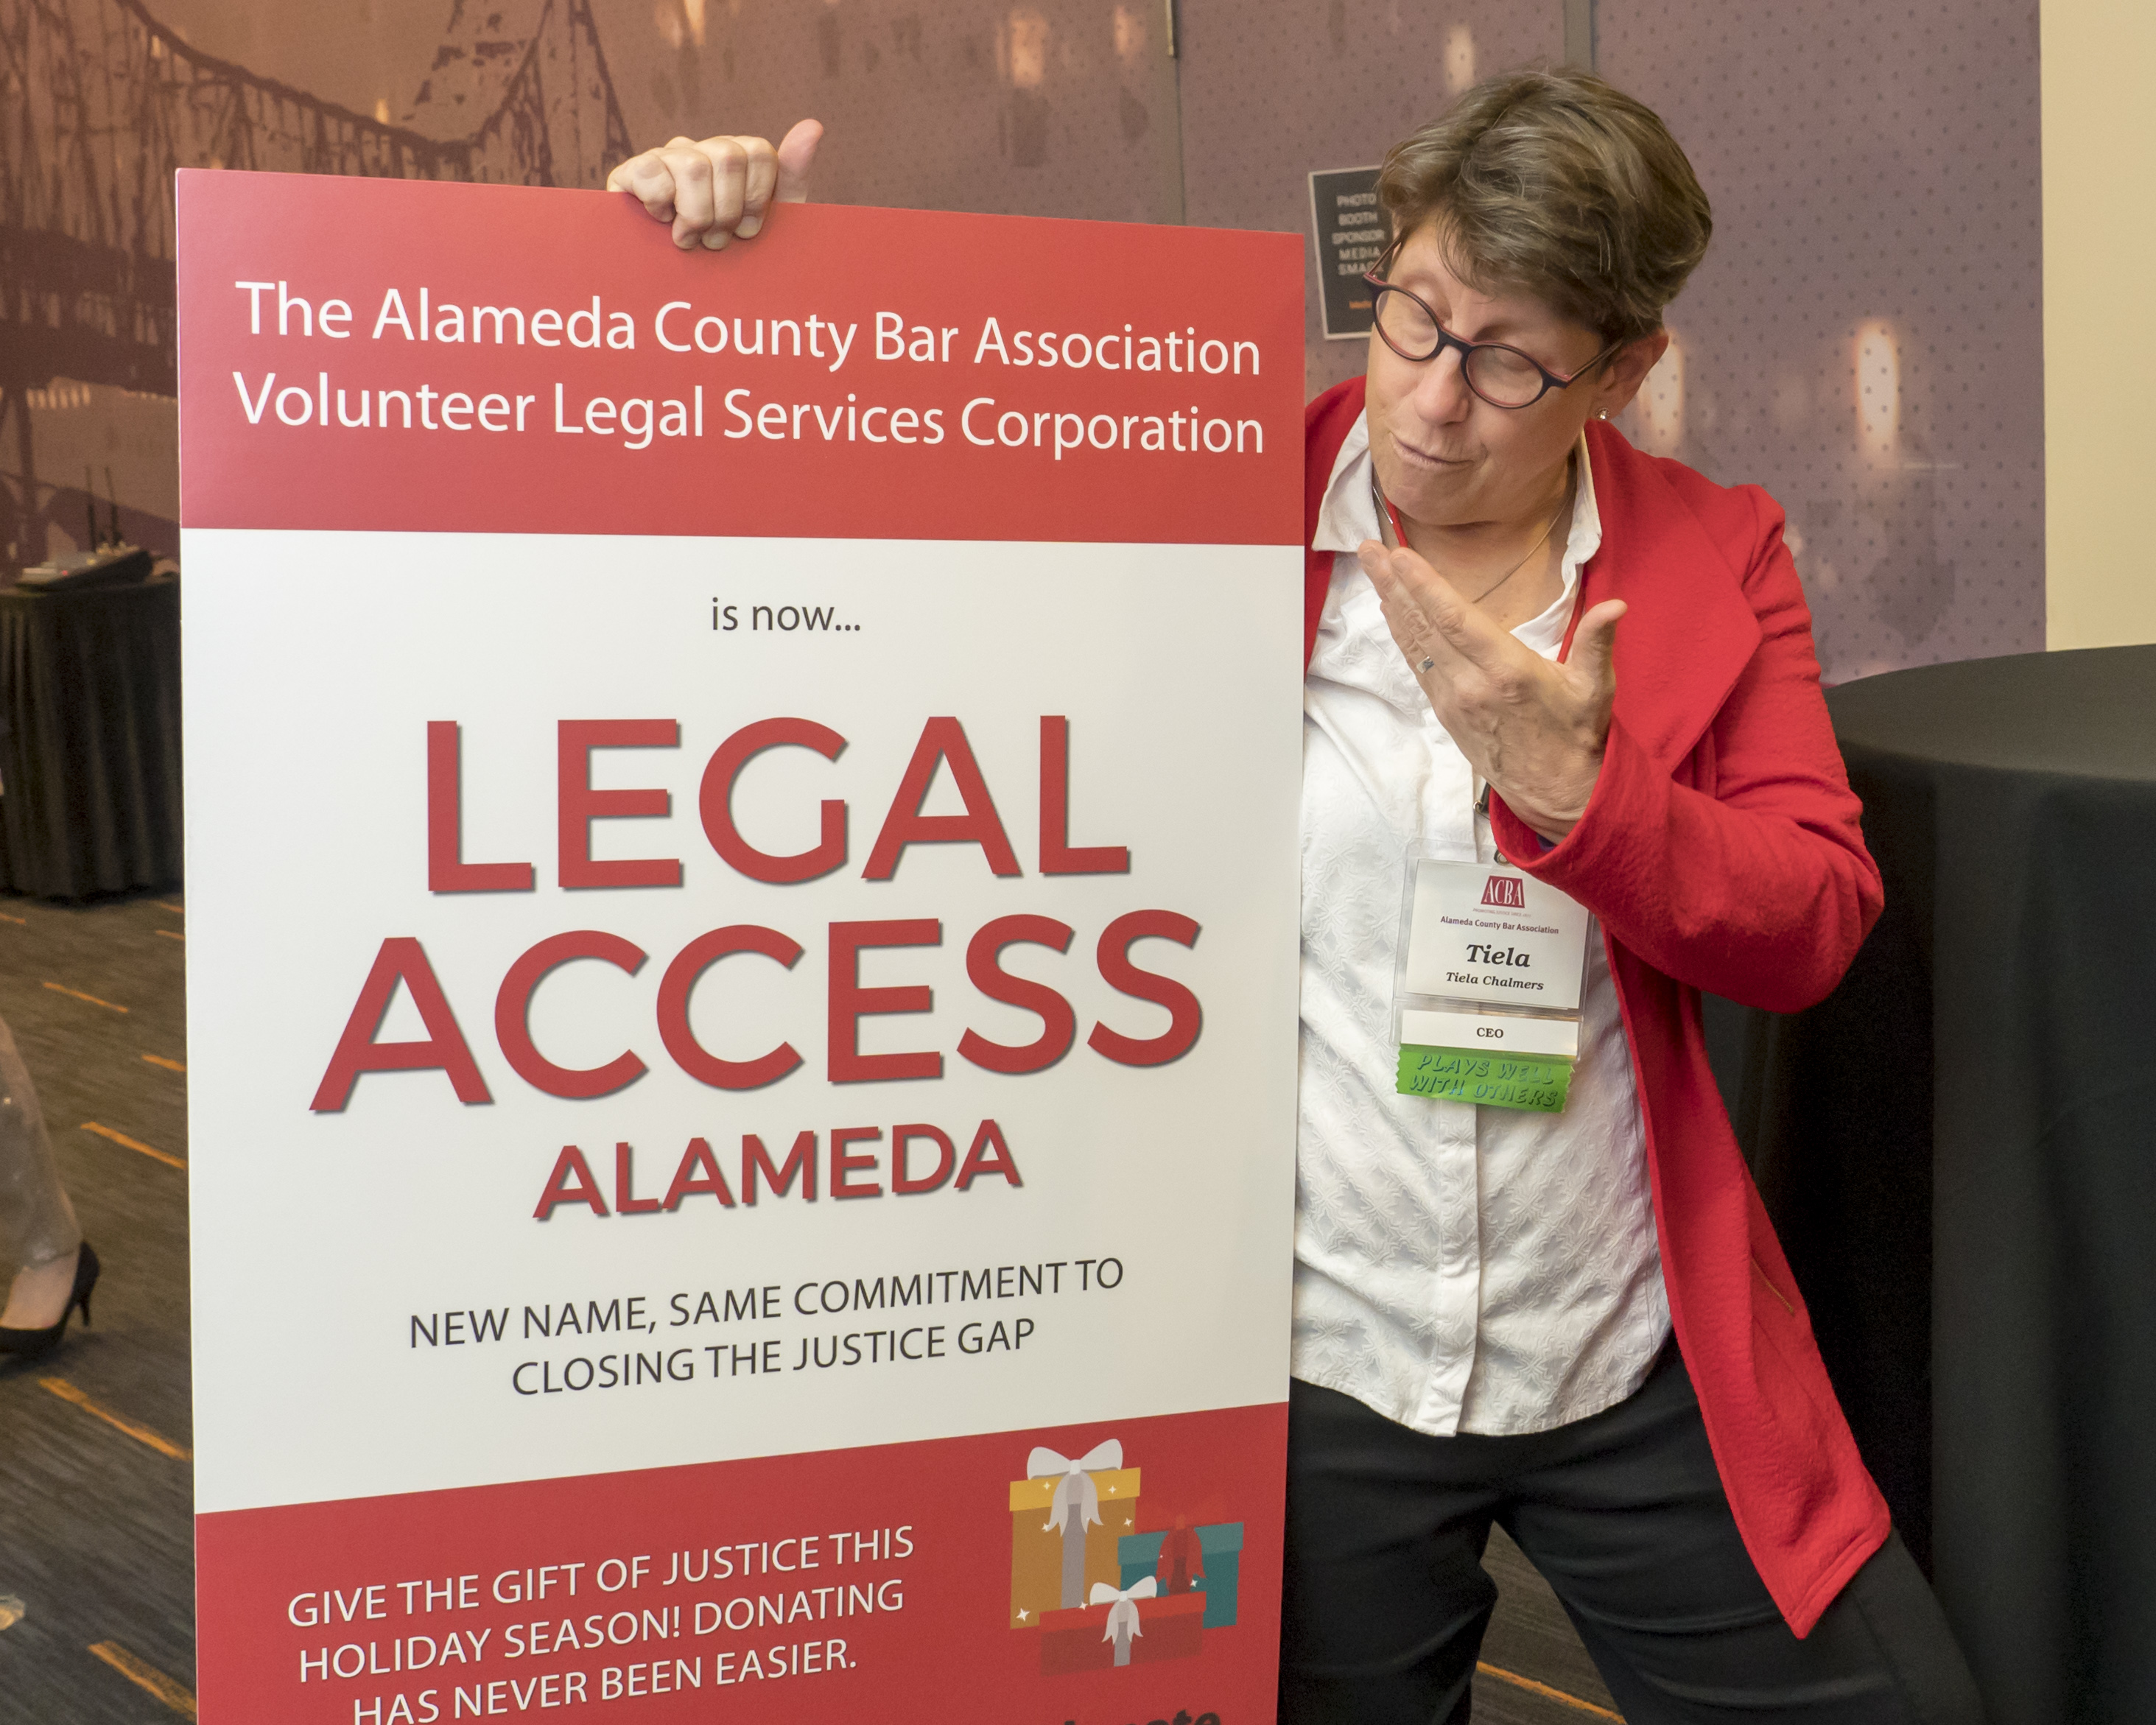 Tiela Chalmers with Legal Access Sign2